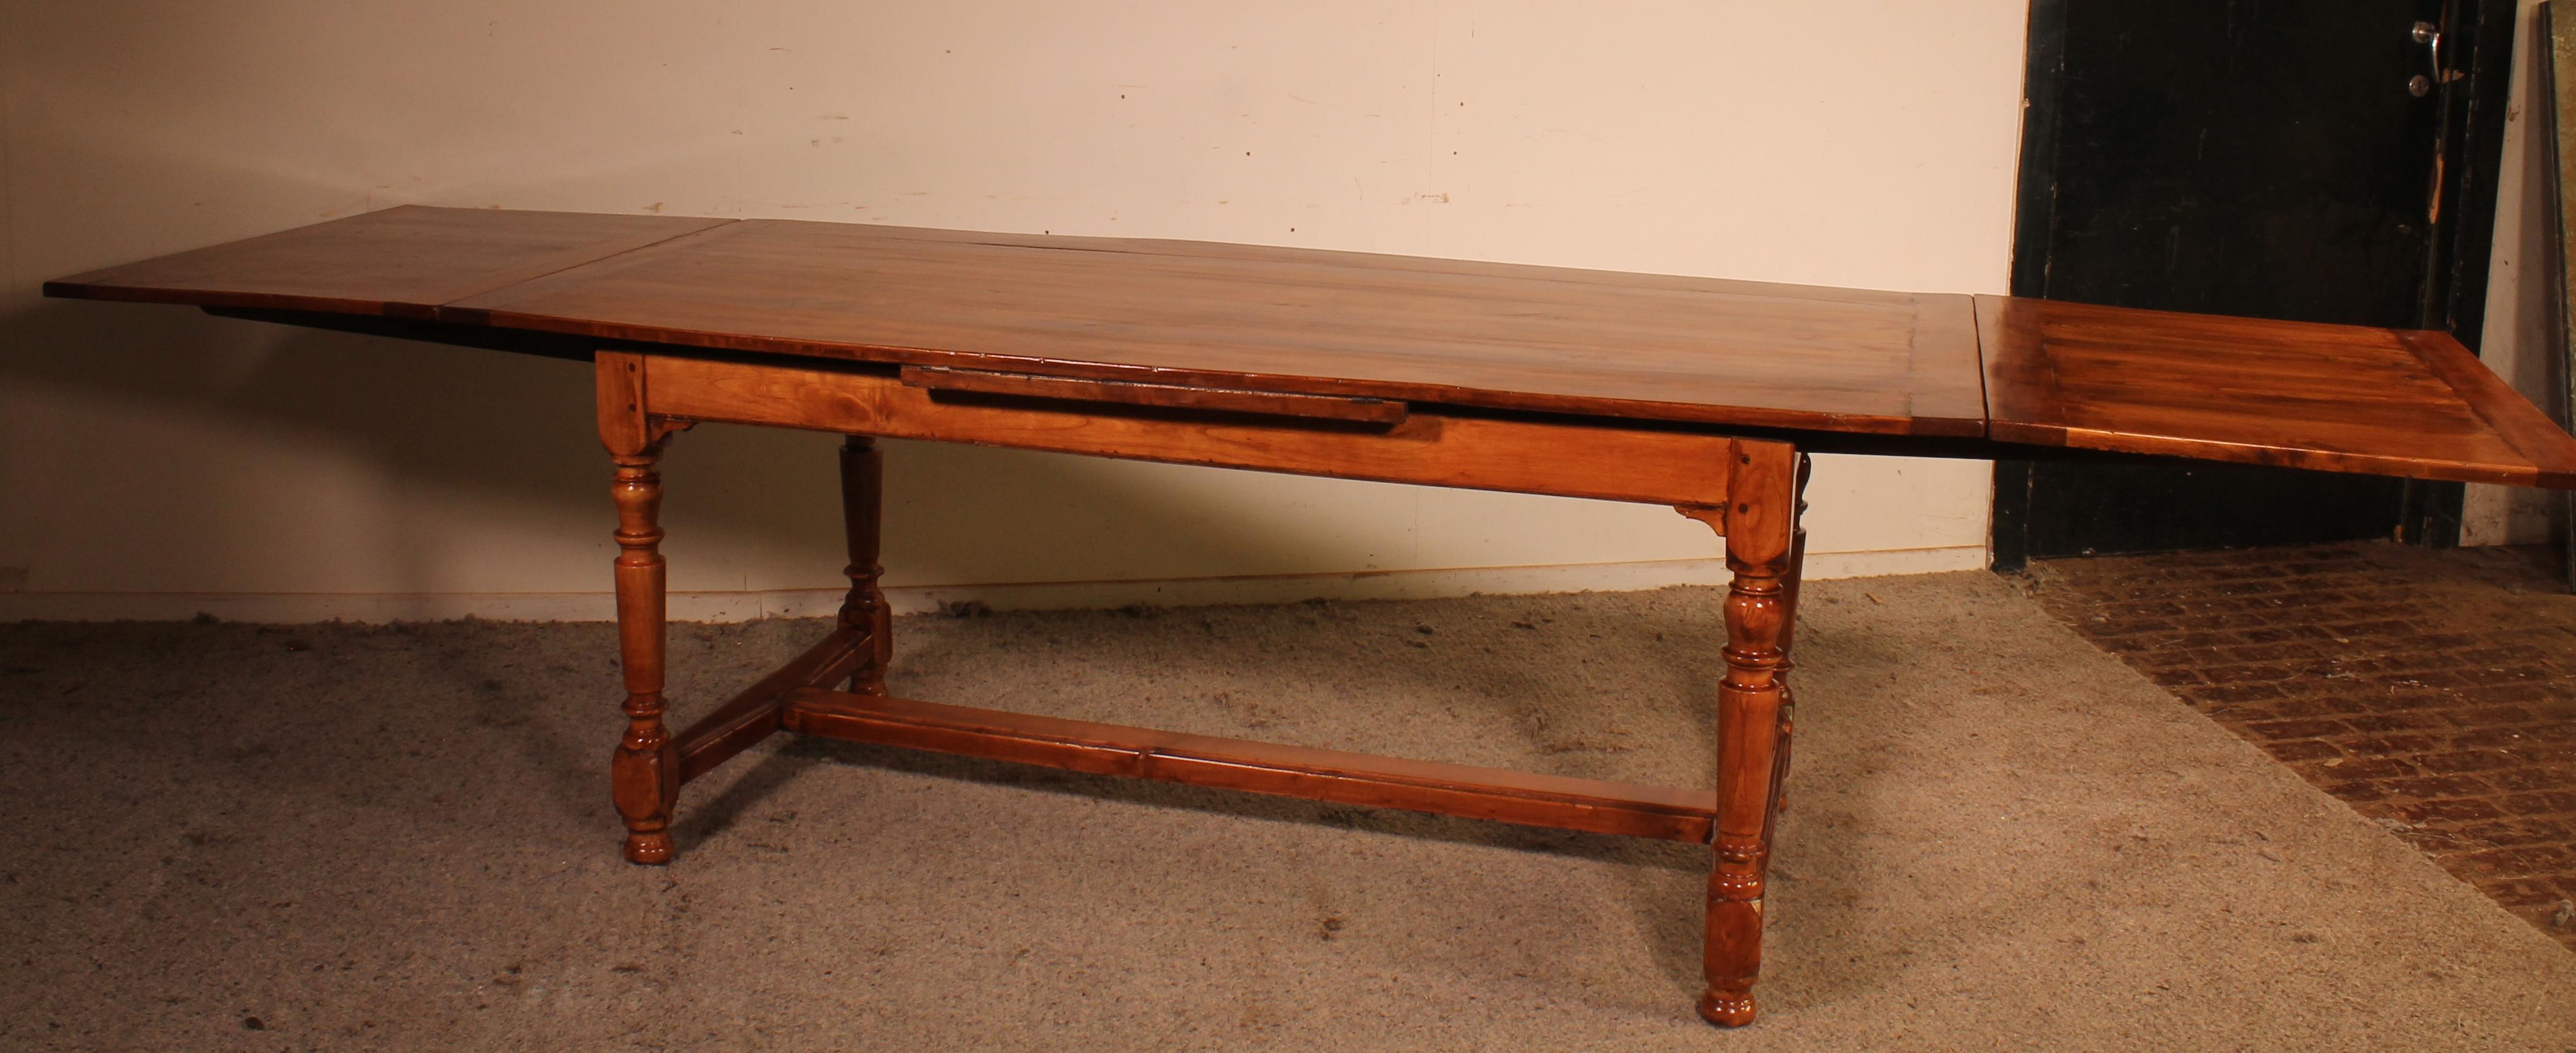 Cherry Extendable Table with Turned Legs, 19th Century, France